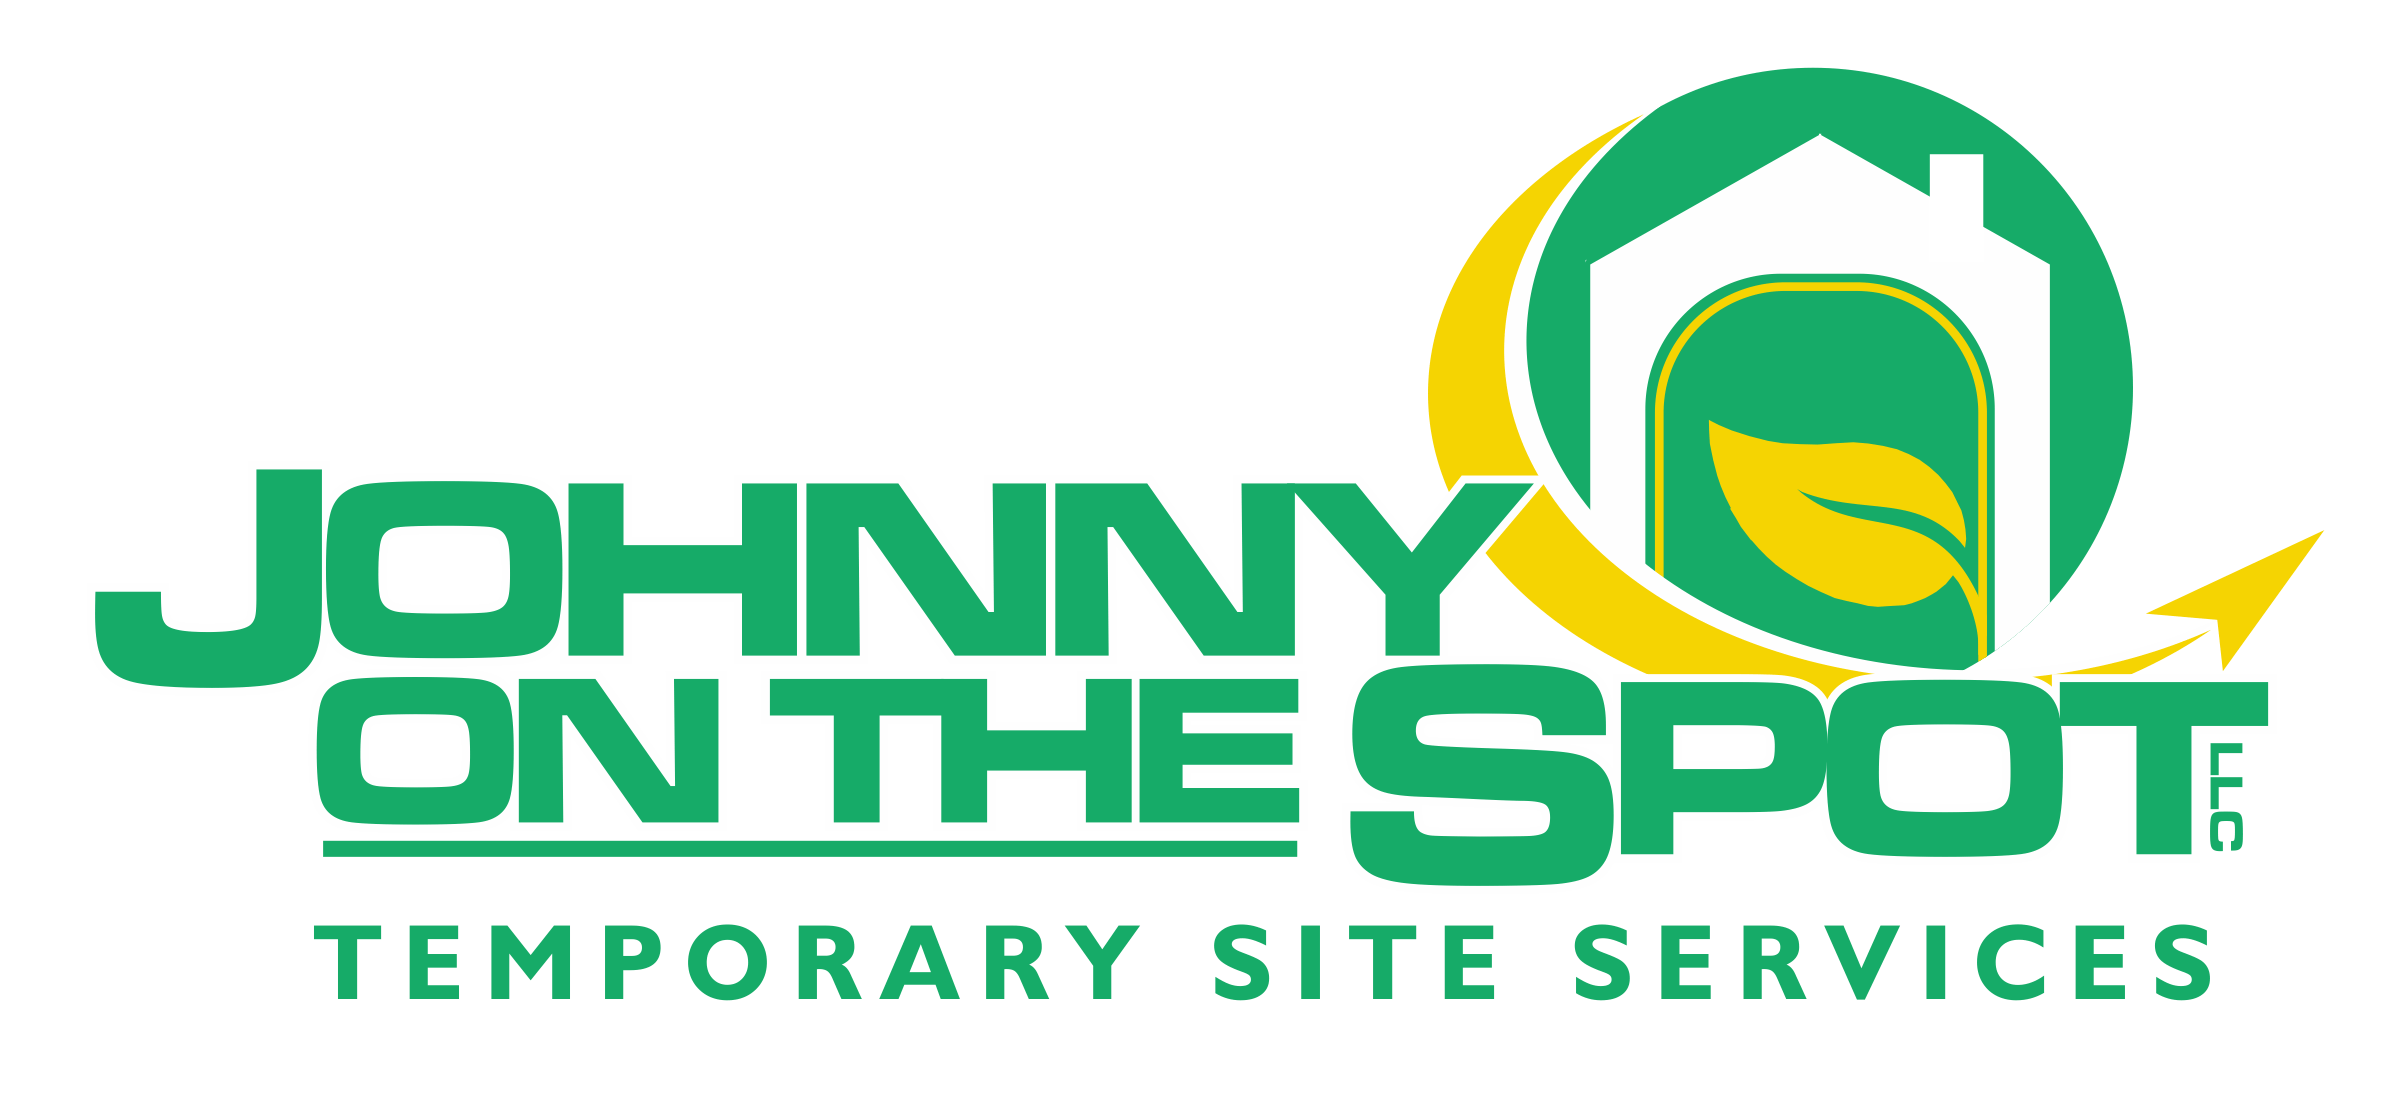 Thespot Logo - Logo of Johnny on the Spot.png